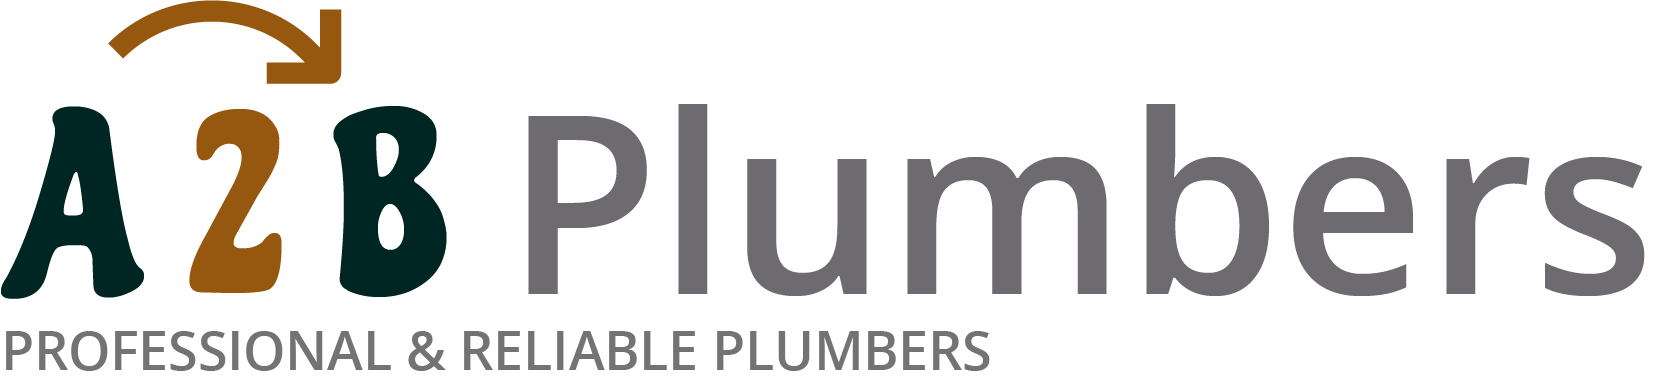 If you need a boiler installed, a radiator repaired or a leaking tap fixed, call us now - we provide services for properties in Dursley and the local area.